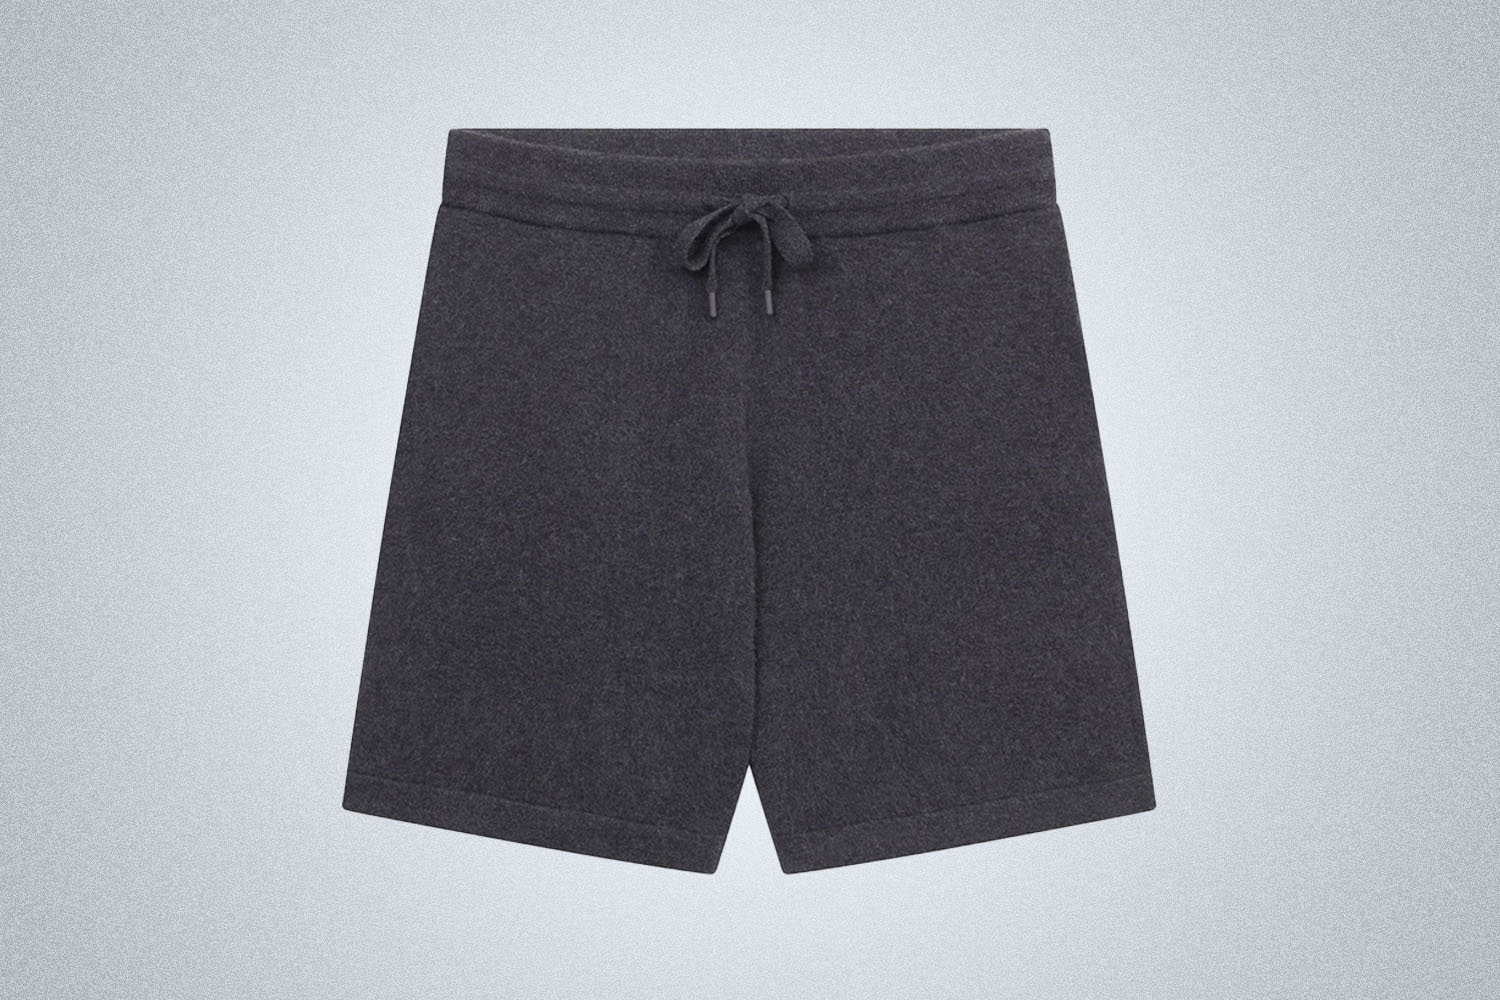 Best sweat shorts for men and women of 2021, according to experts